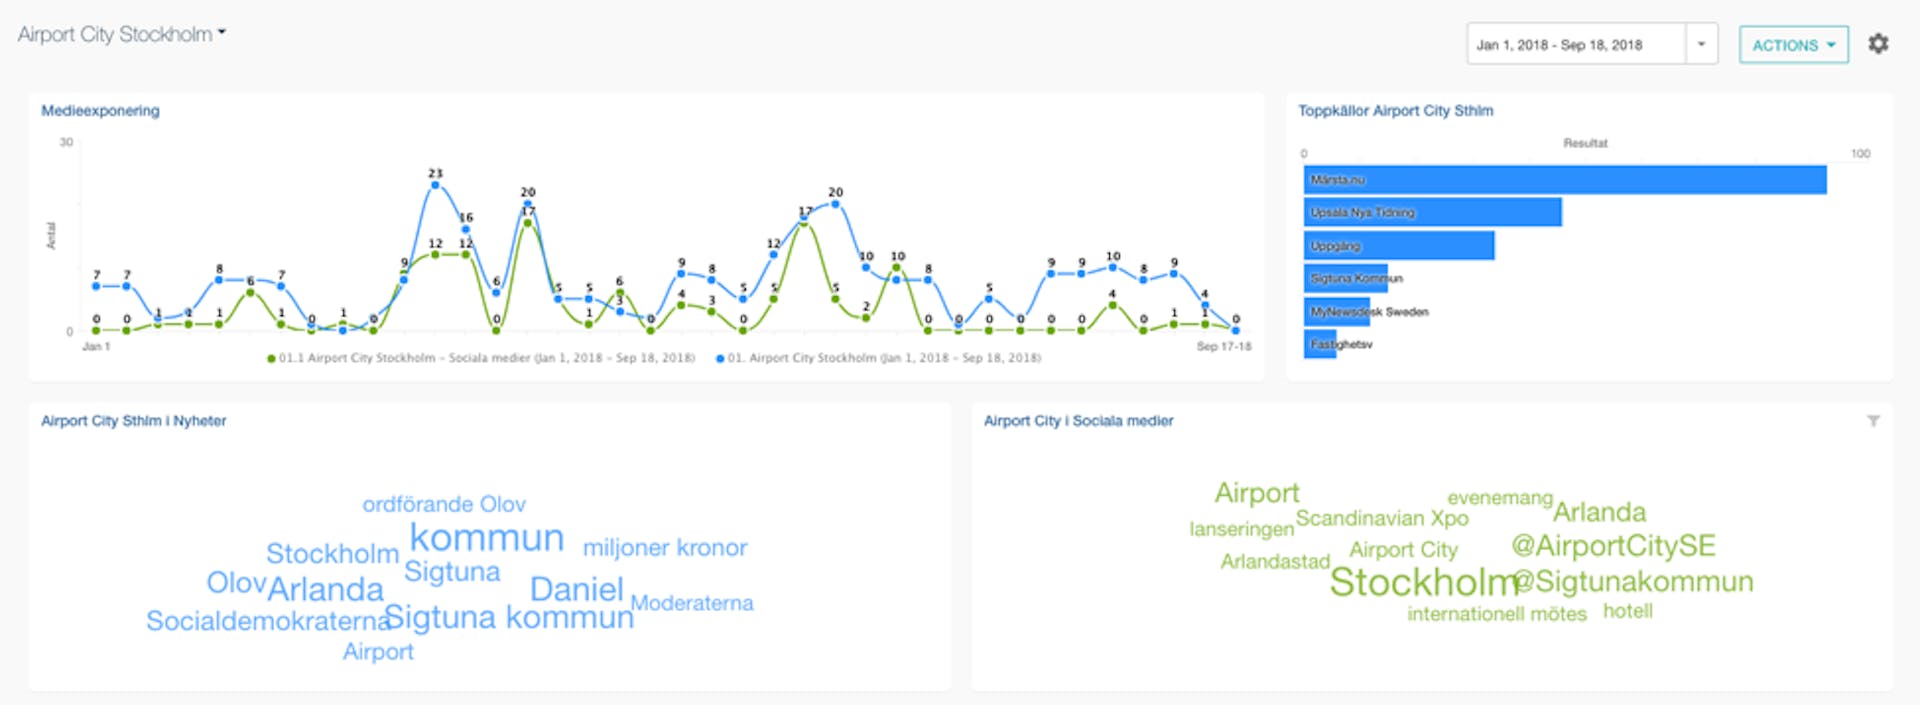 Screenshot of the Meltwater Platform with a media analysis for Airport City Stockholm